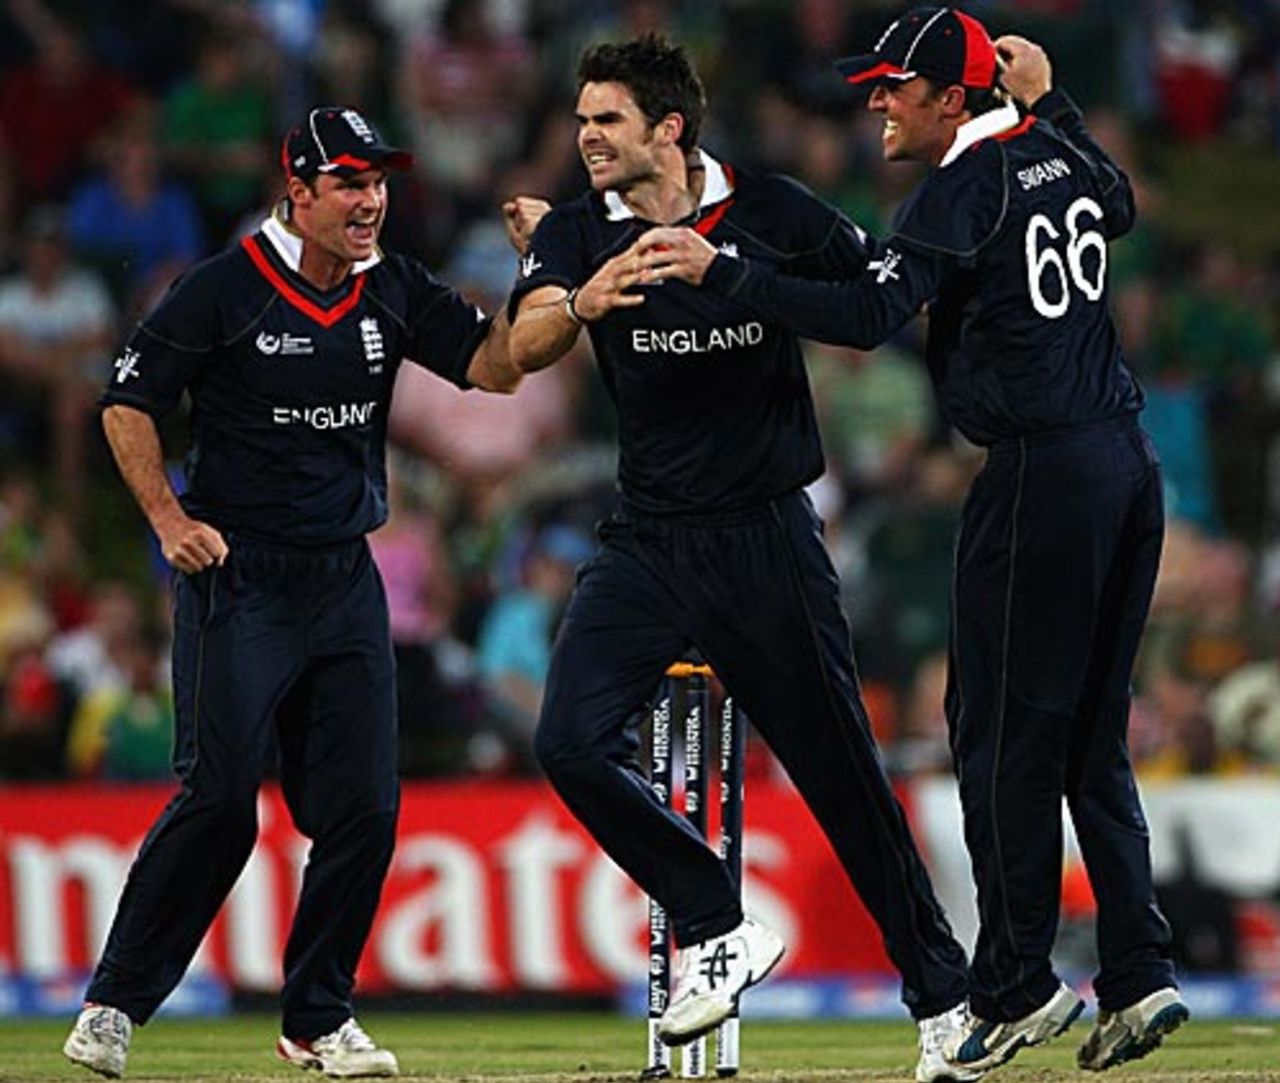 James Anderson understands the value of Herschelle Gibbs' wicket, South Africa v England, ICC Champions Trophy, Group B, Centurion, September 27, 2009